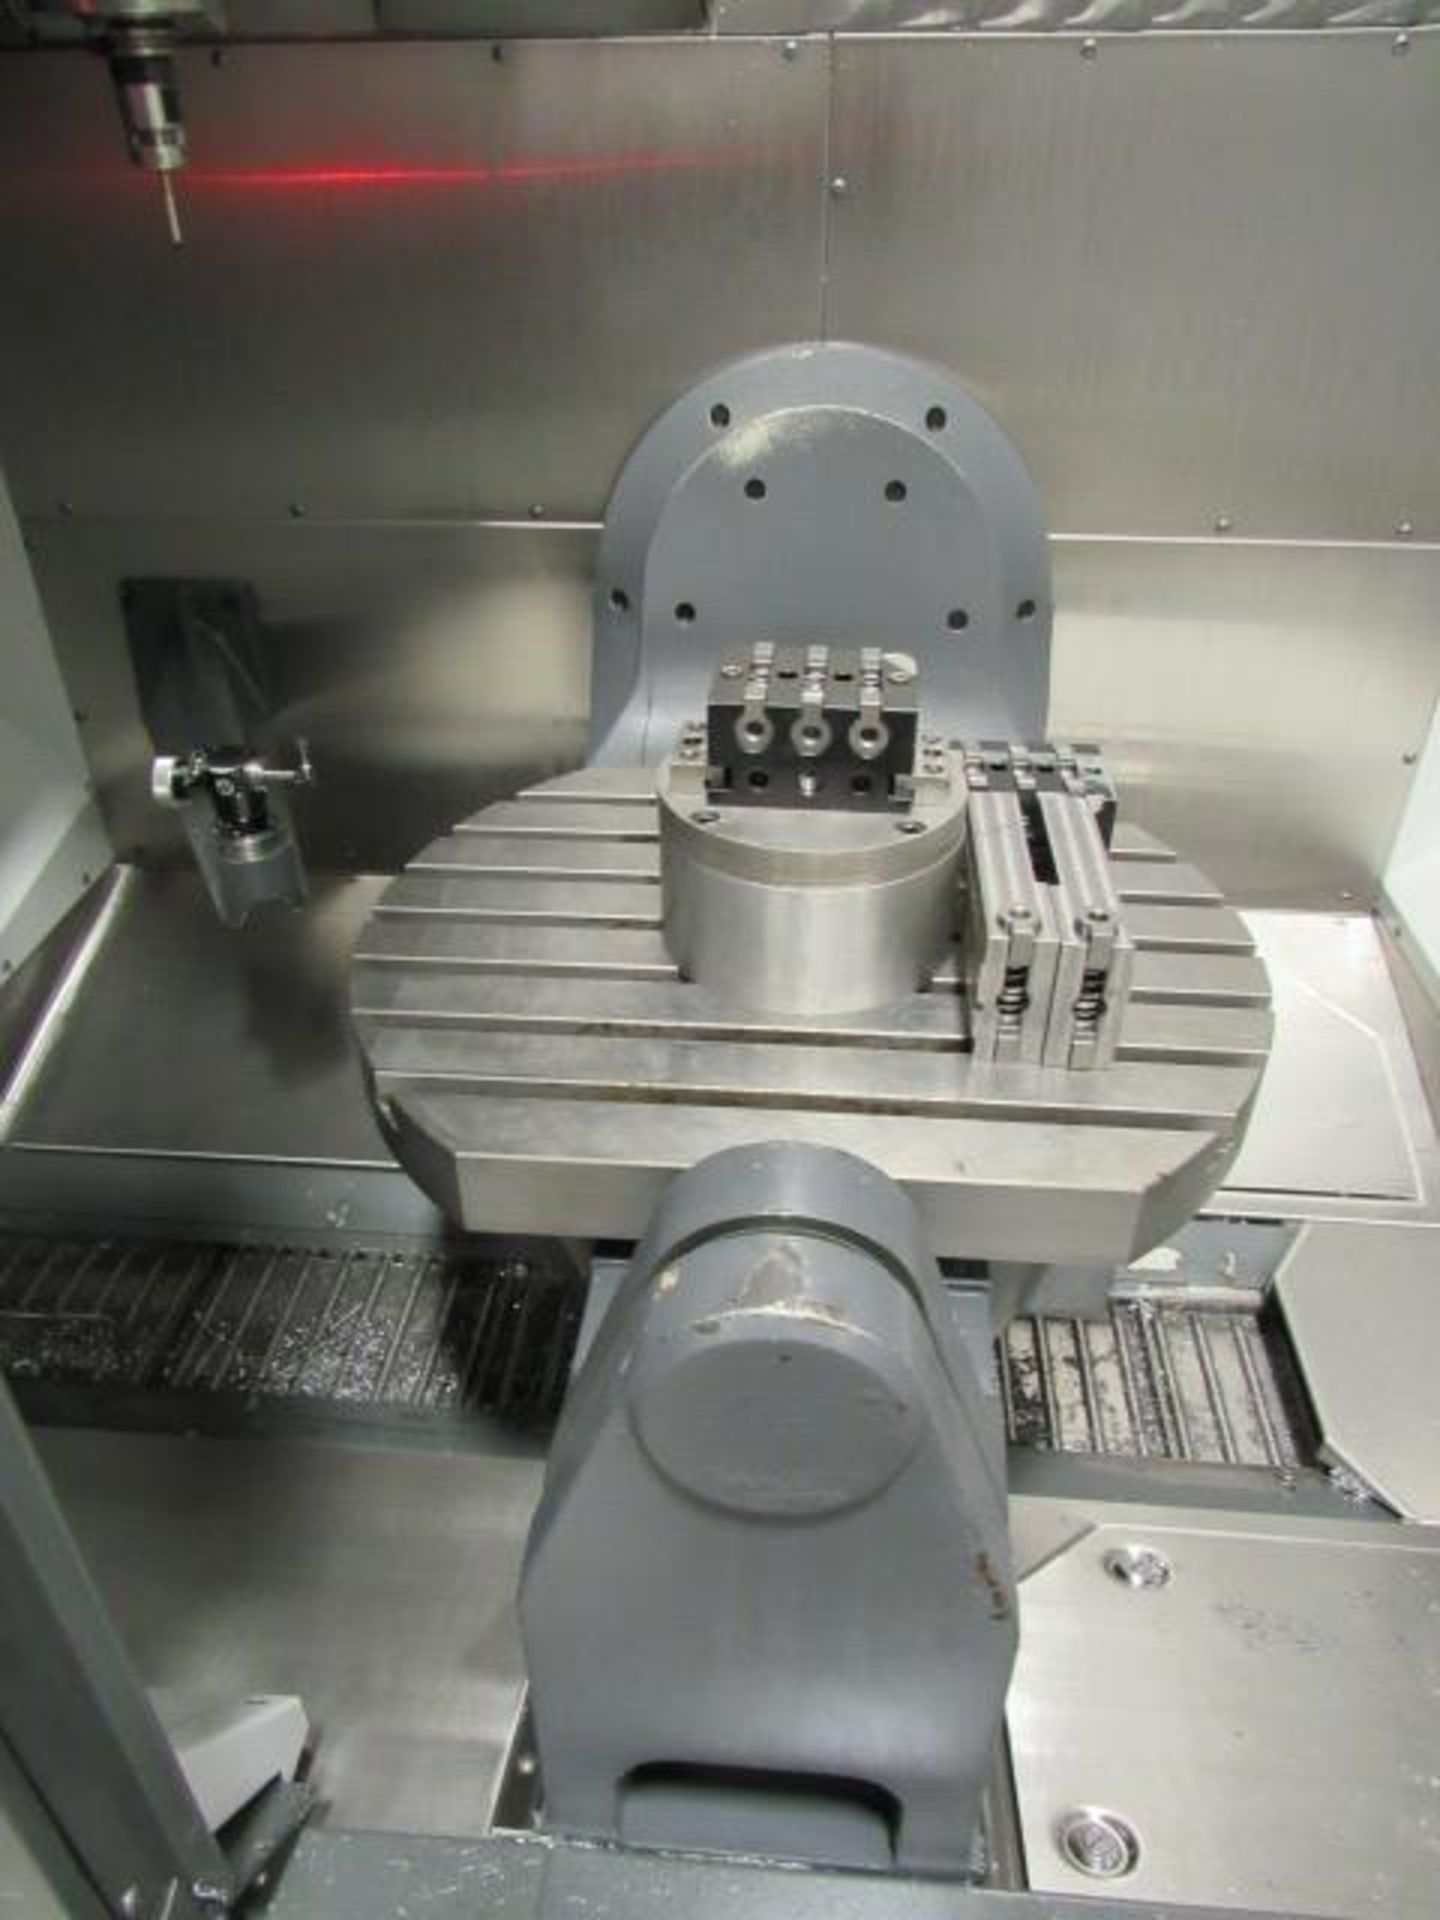 Haas UMC750 5-Axis CNC Vertical Machining Center with 19.7'' Diameter Rotary Trunnion Table, #40 - Image 4 of 6